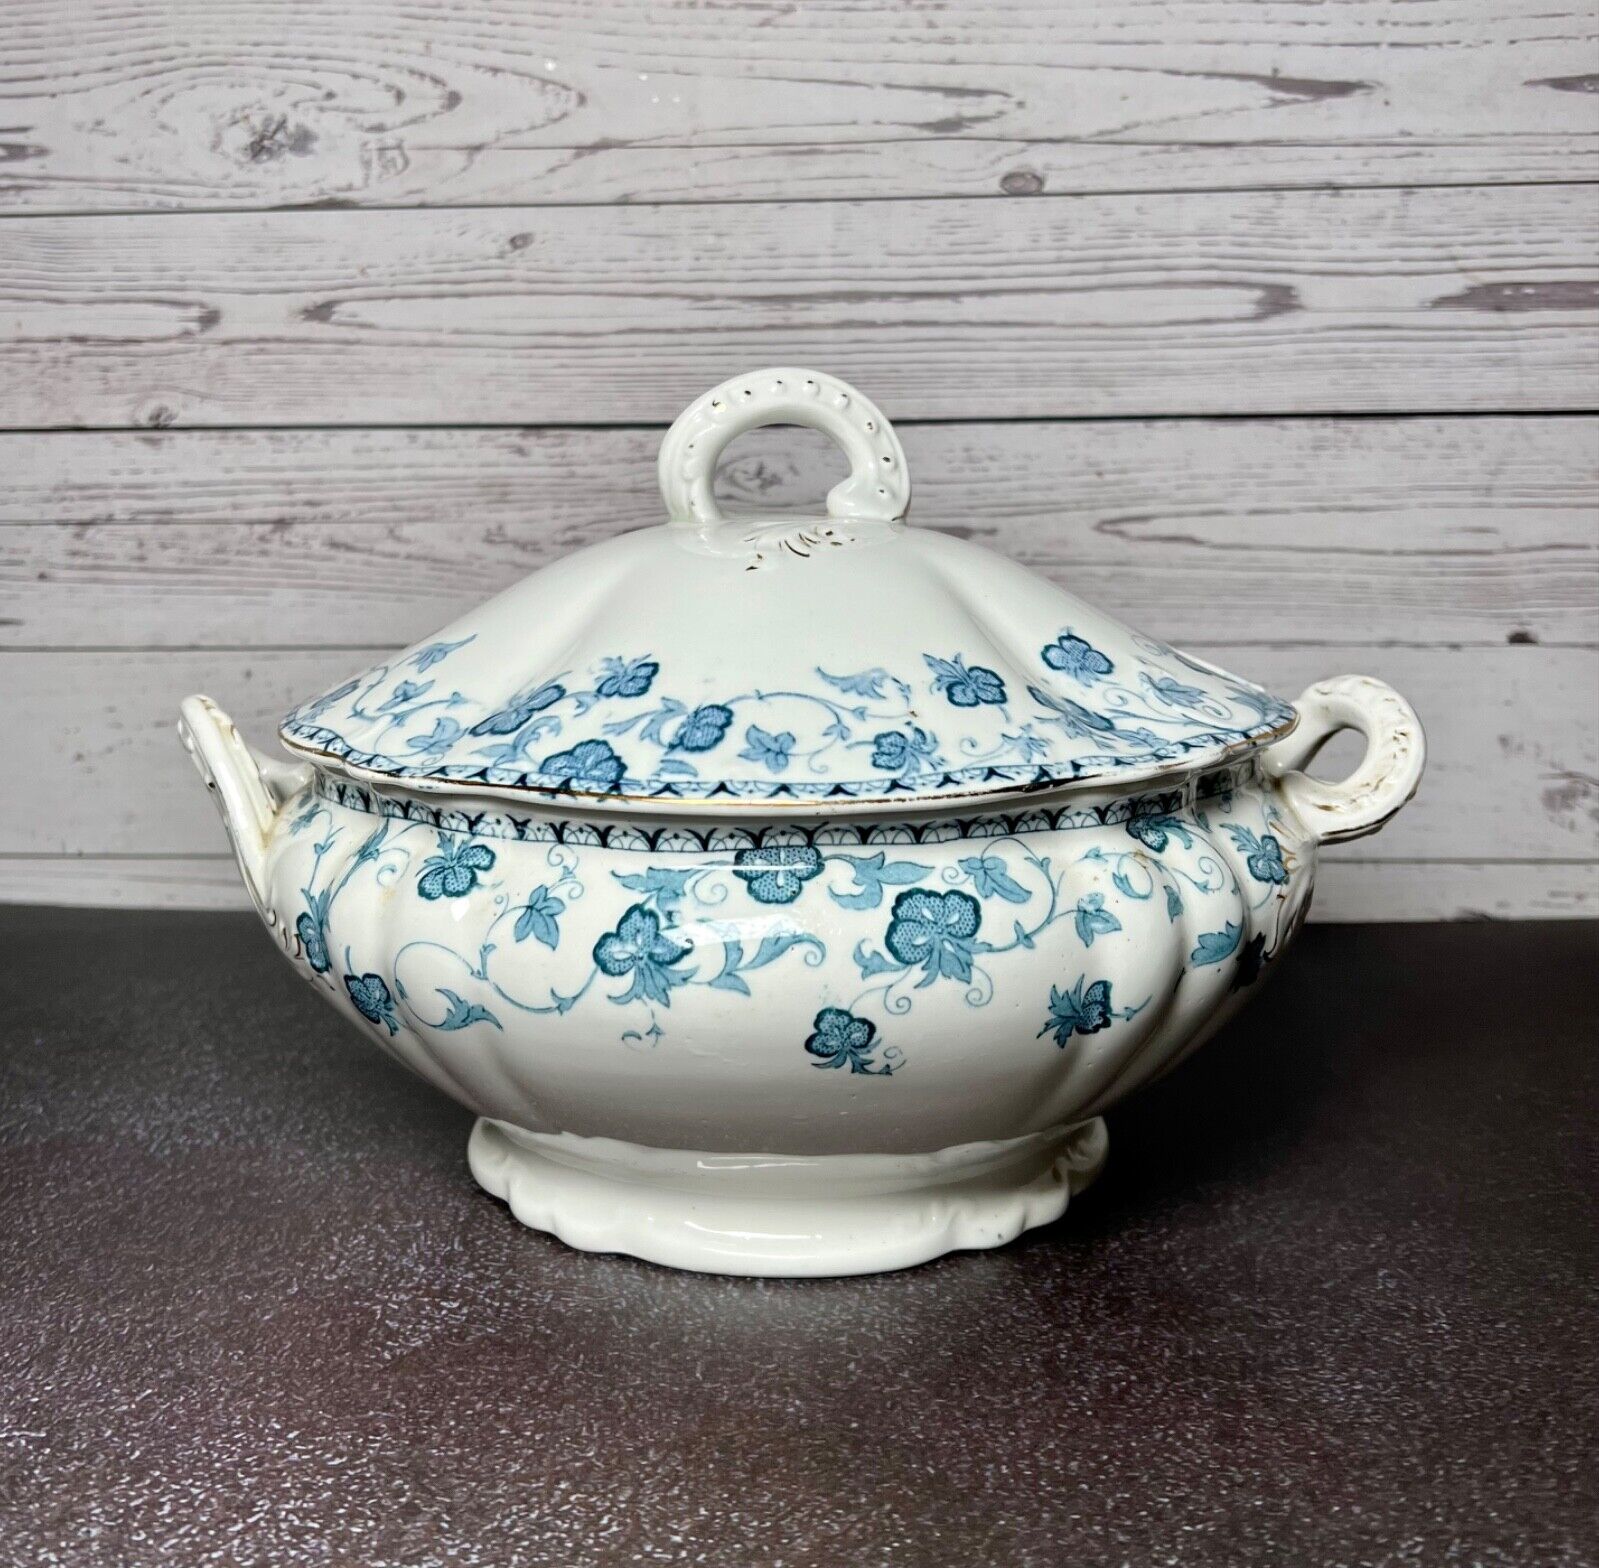 John Maddock & Sons Soup Tureen Antique Ironstone Blue Floral Pattern England